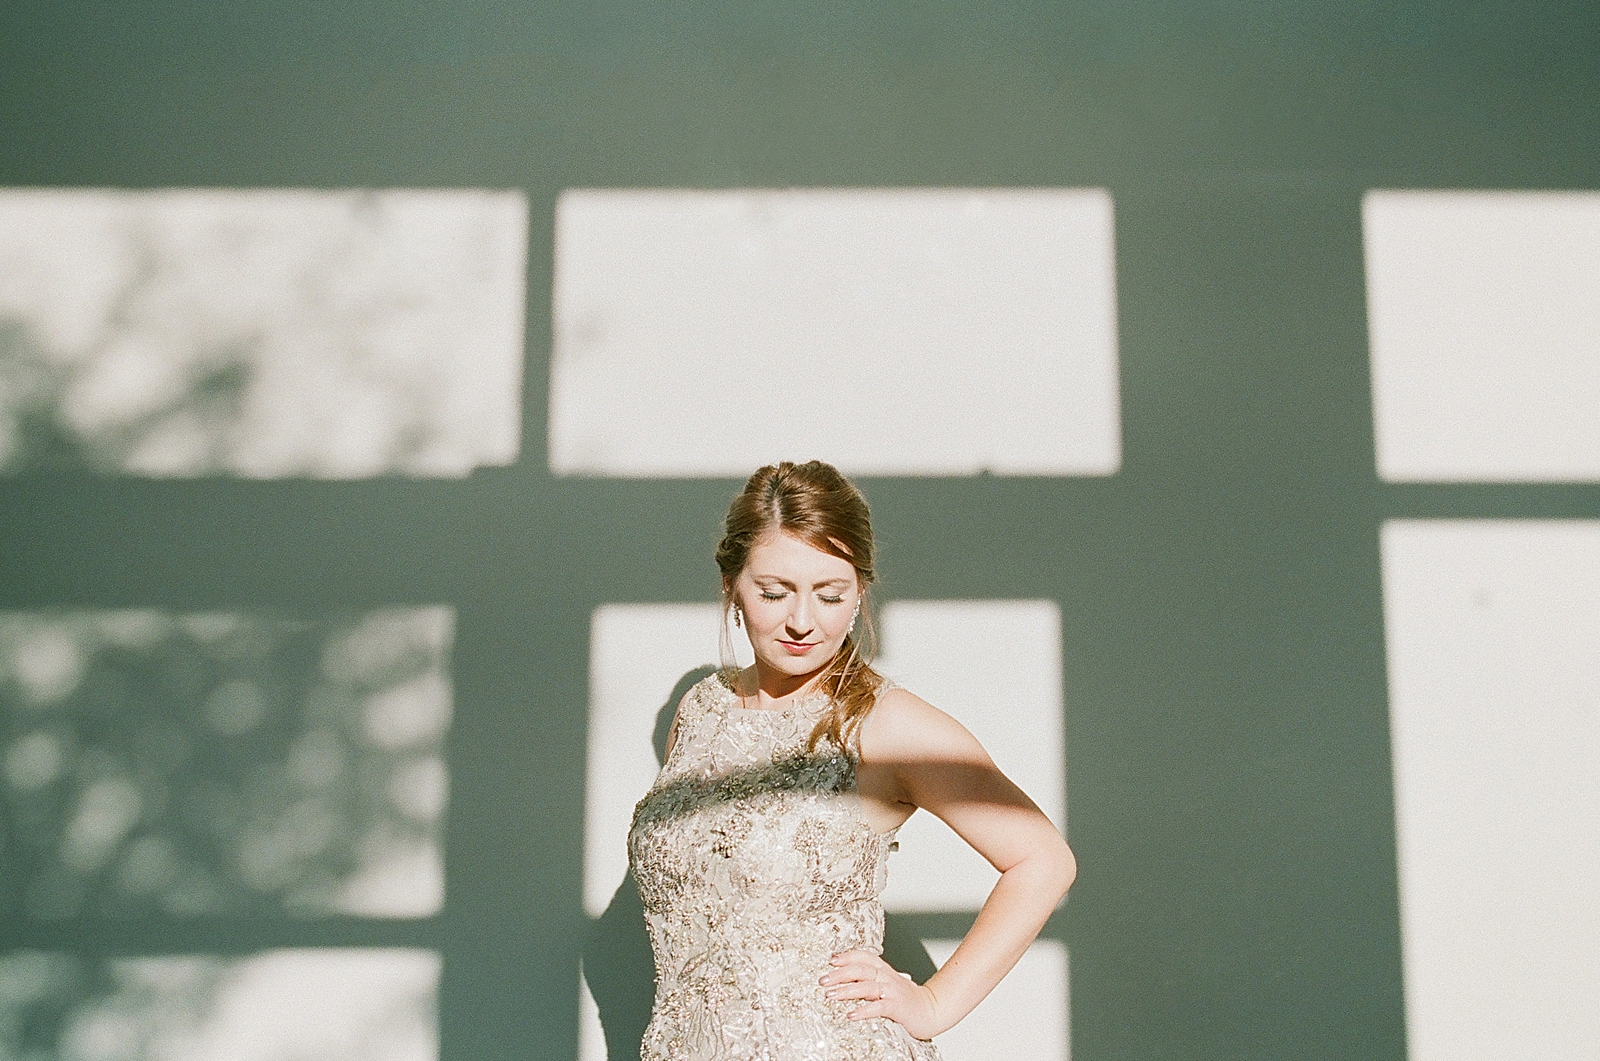 Asheville Bridal Editorial Bride Looking Down with Shadows on the Wall Behind Photo